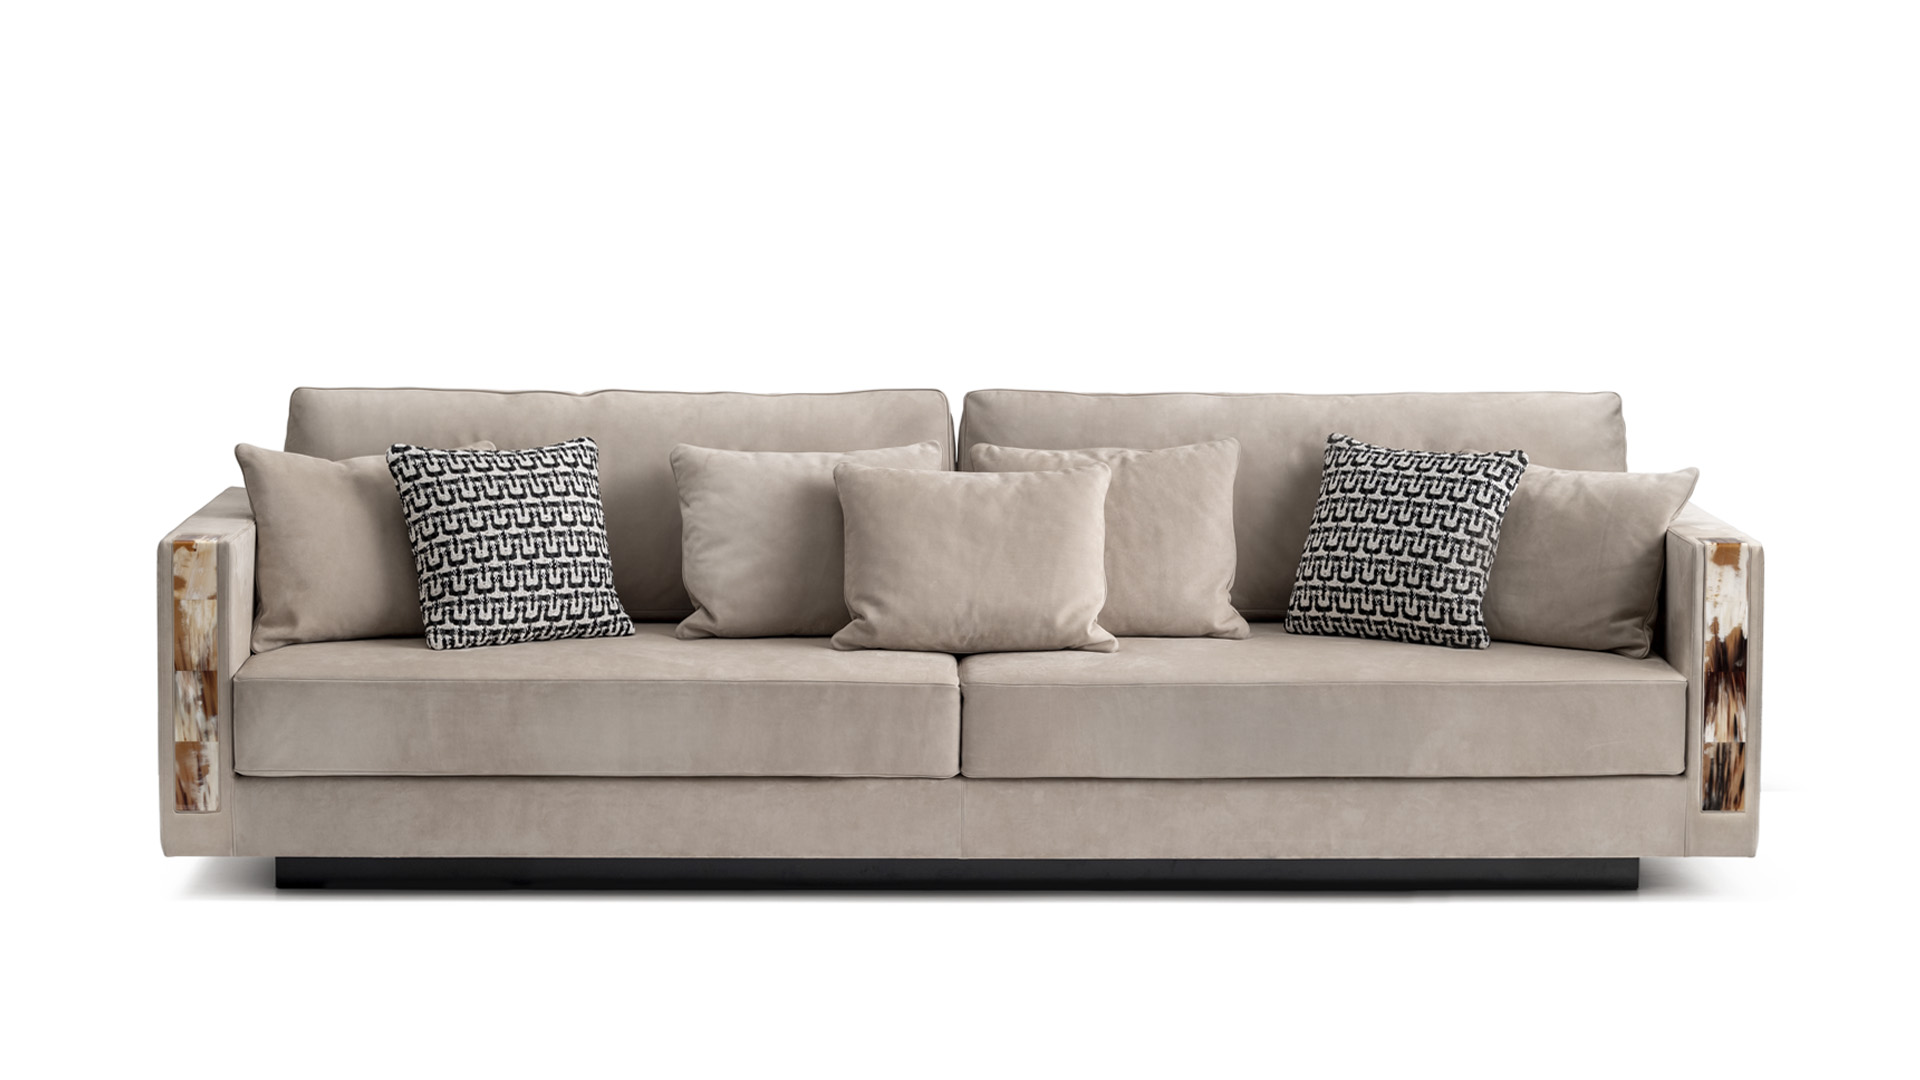 Sofas and seats - Zeus sofa in nabuk leather with armrests in horn - cover - Arcahorn